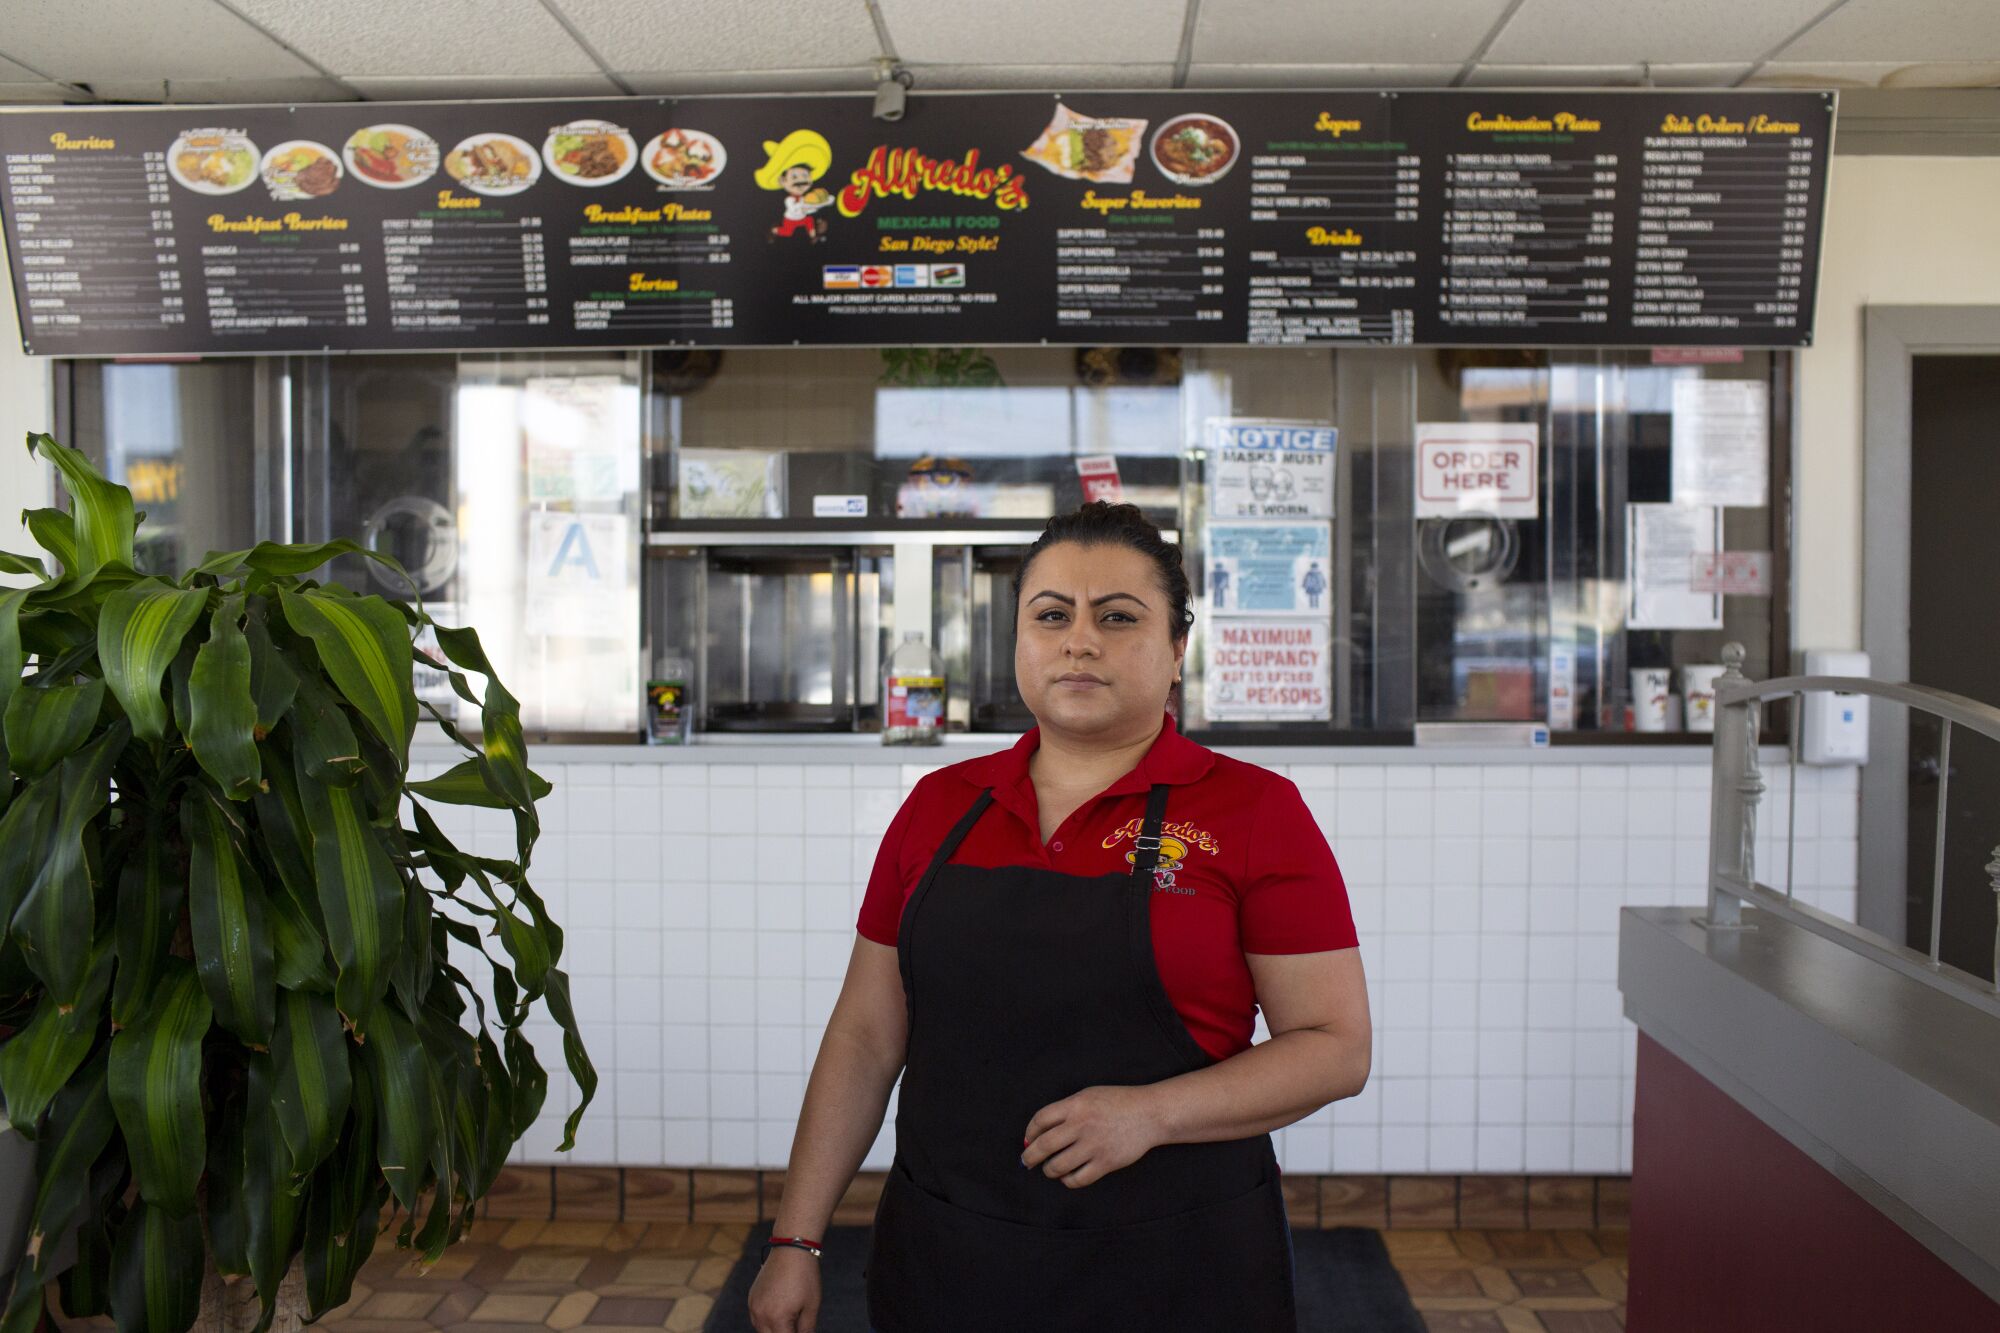 Herminia Reyes stands in front of the order window at Alfredo's Mexican Food